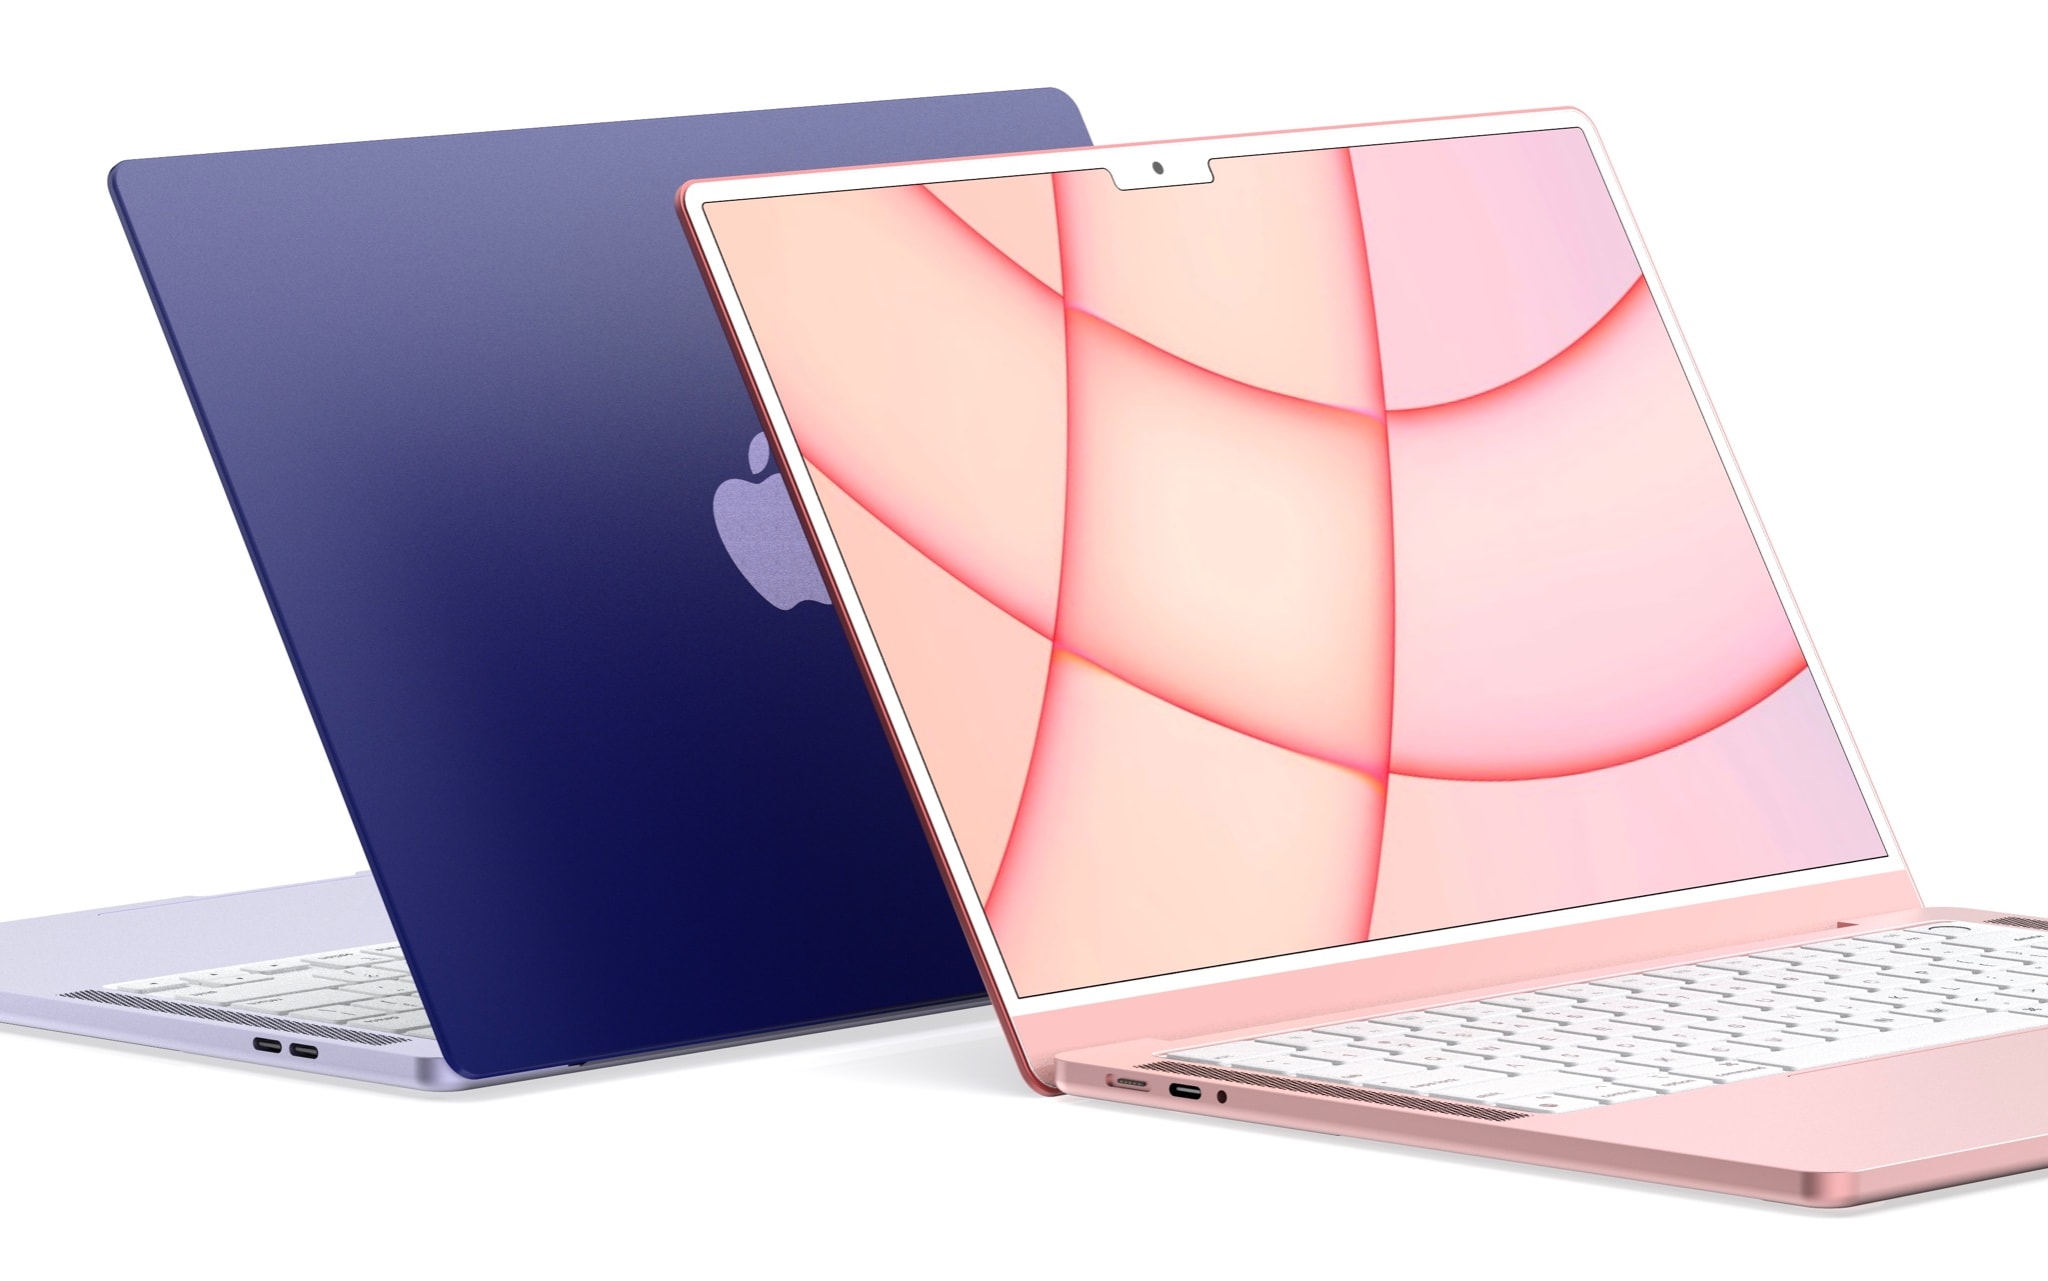 M2 MacBook Air may not come in the same eye-catching colors as the M1 iMac